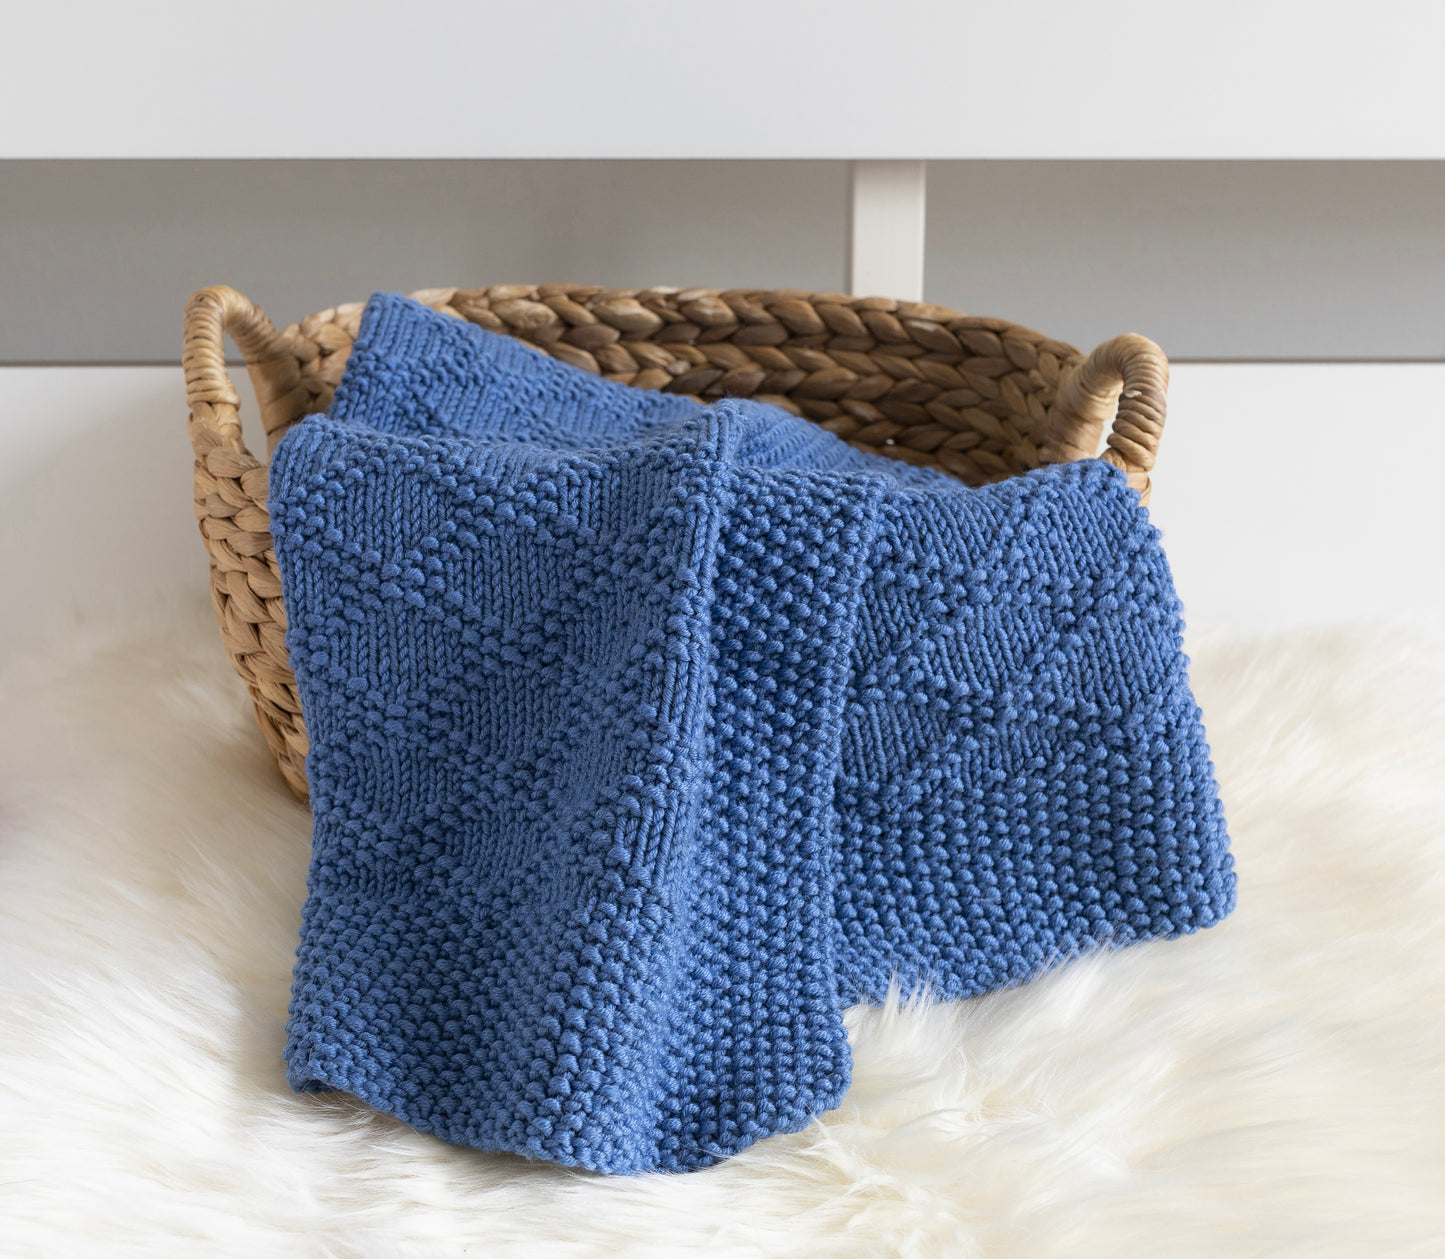 Merino wool hand-knitted baby blanket in Charles Brocade knitting pattern in a basket